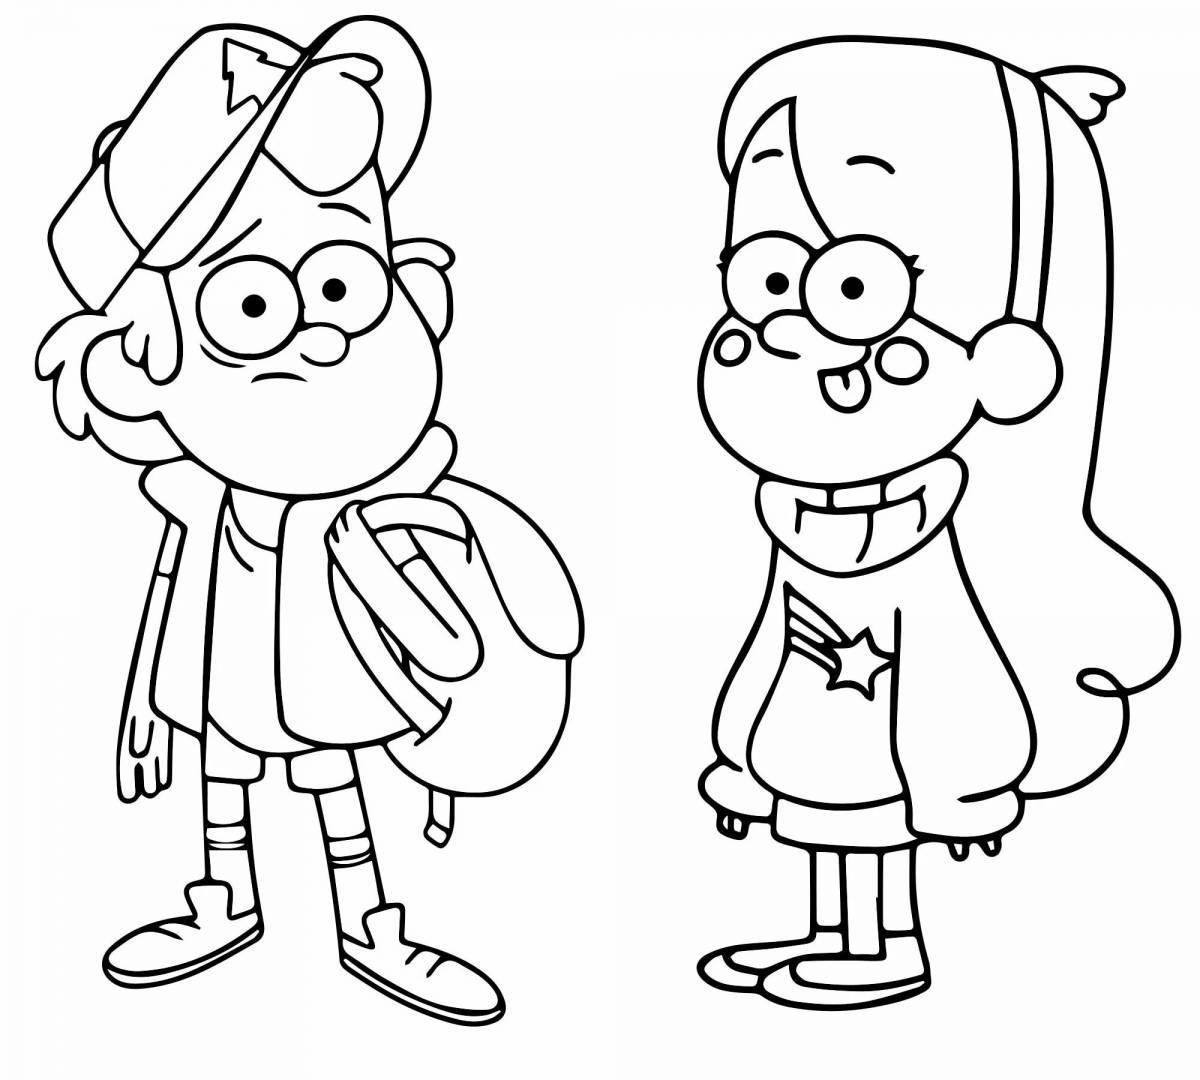 Gravity falls awesome coloring book for girls